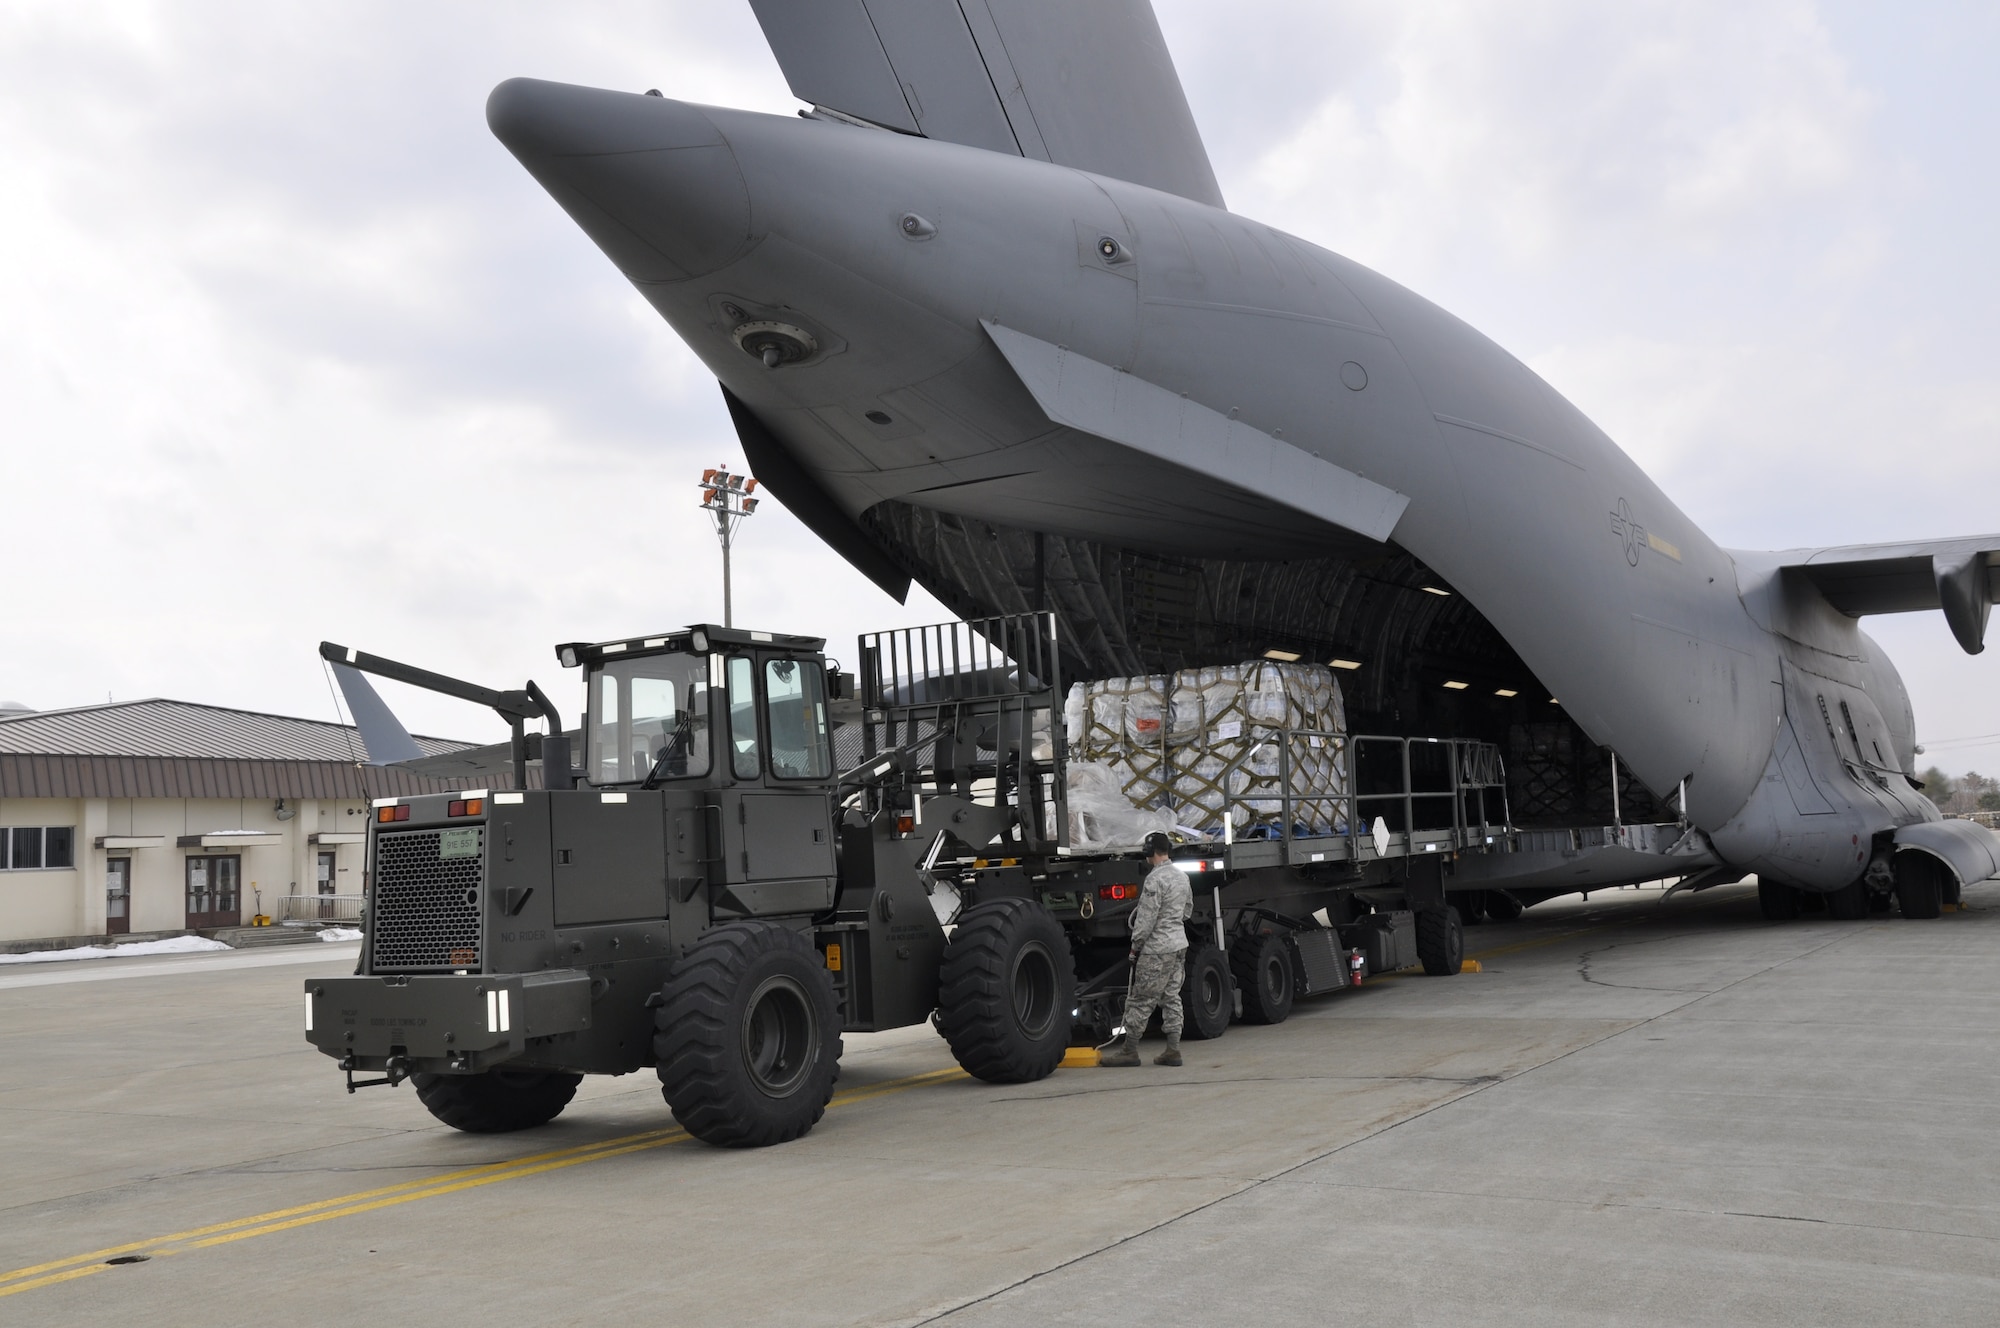 MISAWA AIR BASE, Japan -- Airmen unload pallets of water from a U.S. Air Force C-17 Globemaster III, here March 30. The aircraft delivered 87,000 pounds of bottled water in support of Operation Tomodachi. (U.S. Air Force photo by Senior Airman Joe McFadden/Released)